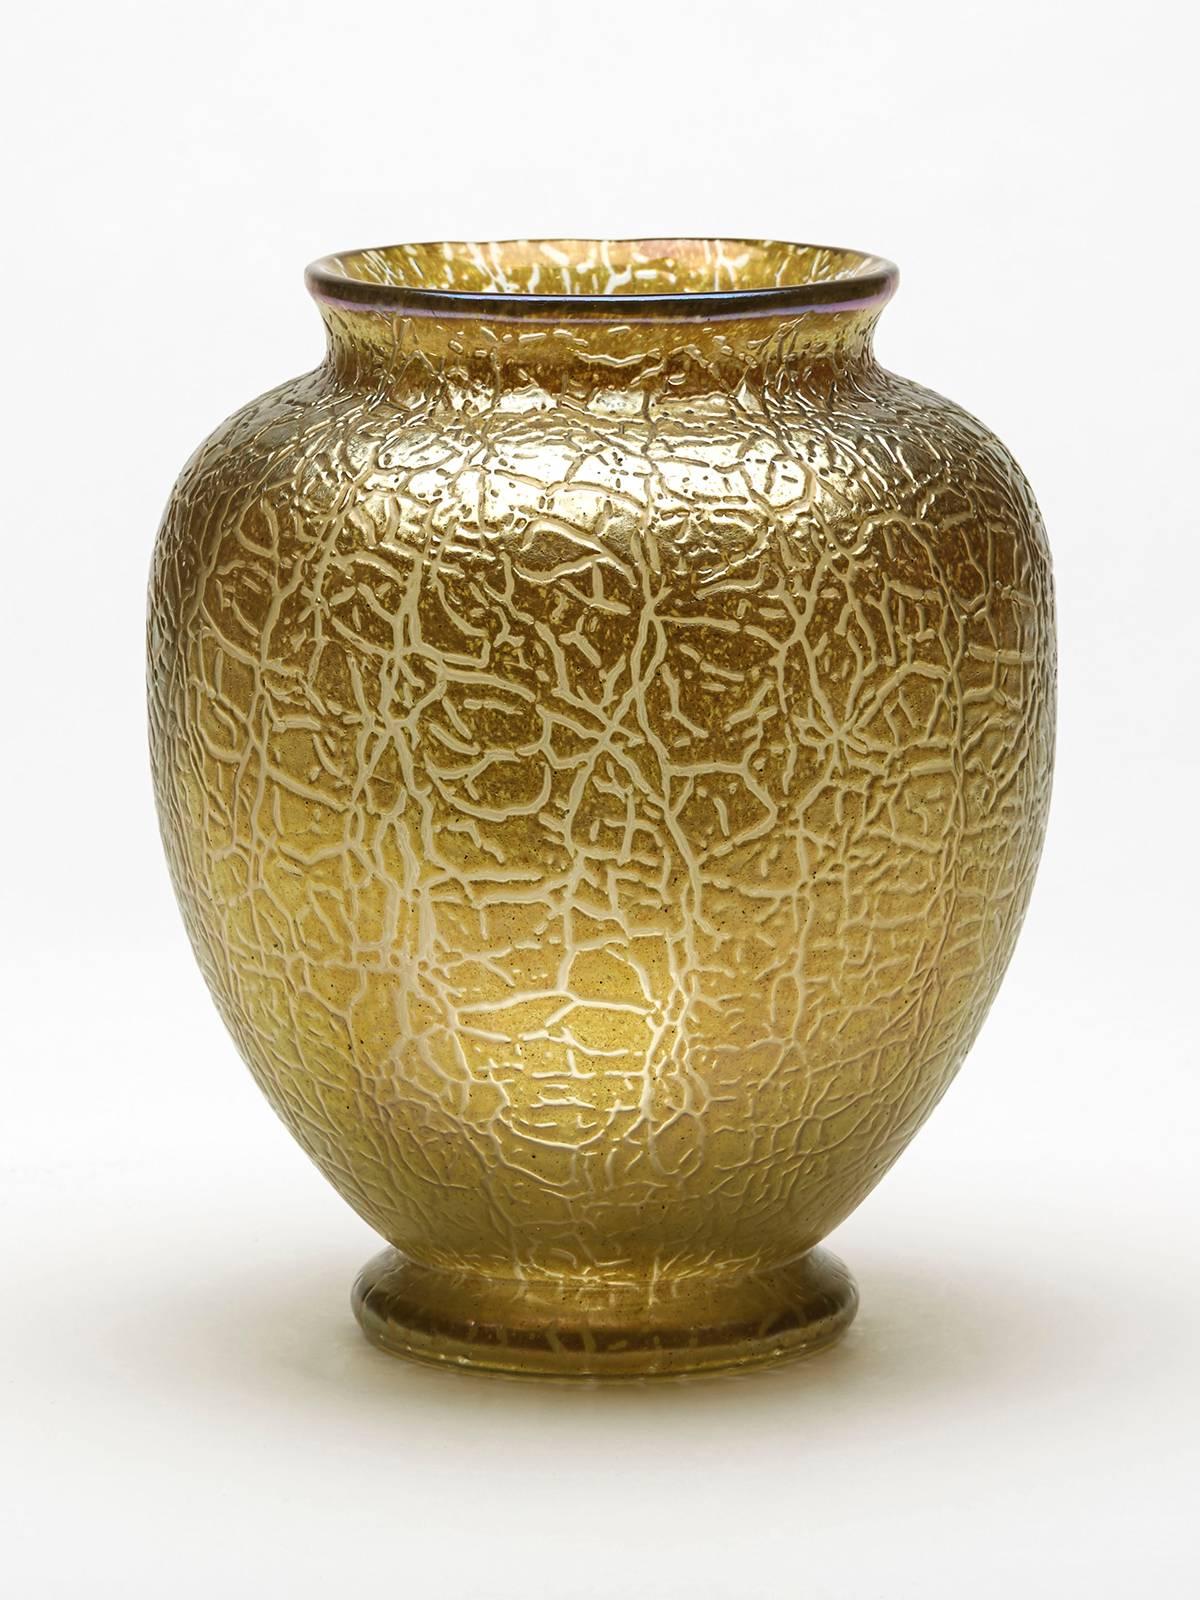 A stunning Art Nouveau art glass vase with a golden yellow crackle finish with iridescent hues. The rounded bulbous vase has a polished pontil mark to the base and is not marked.